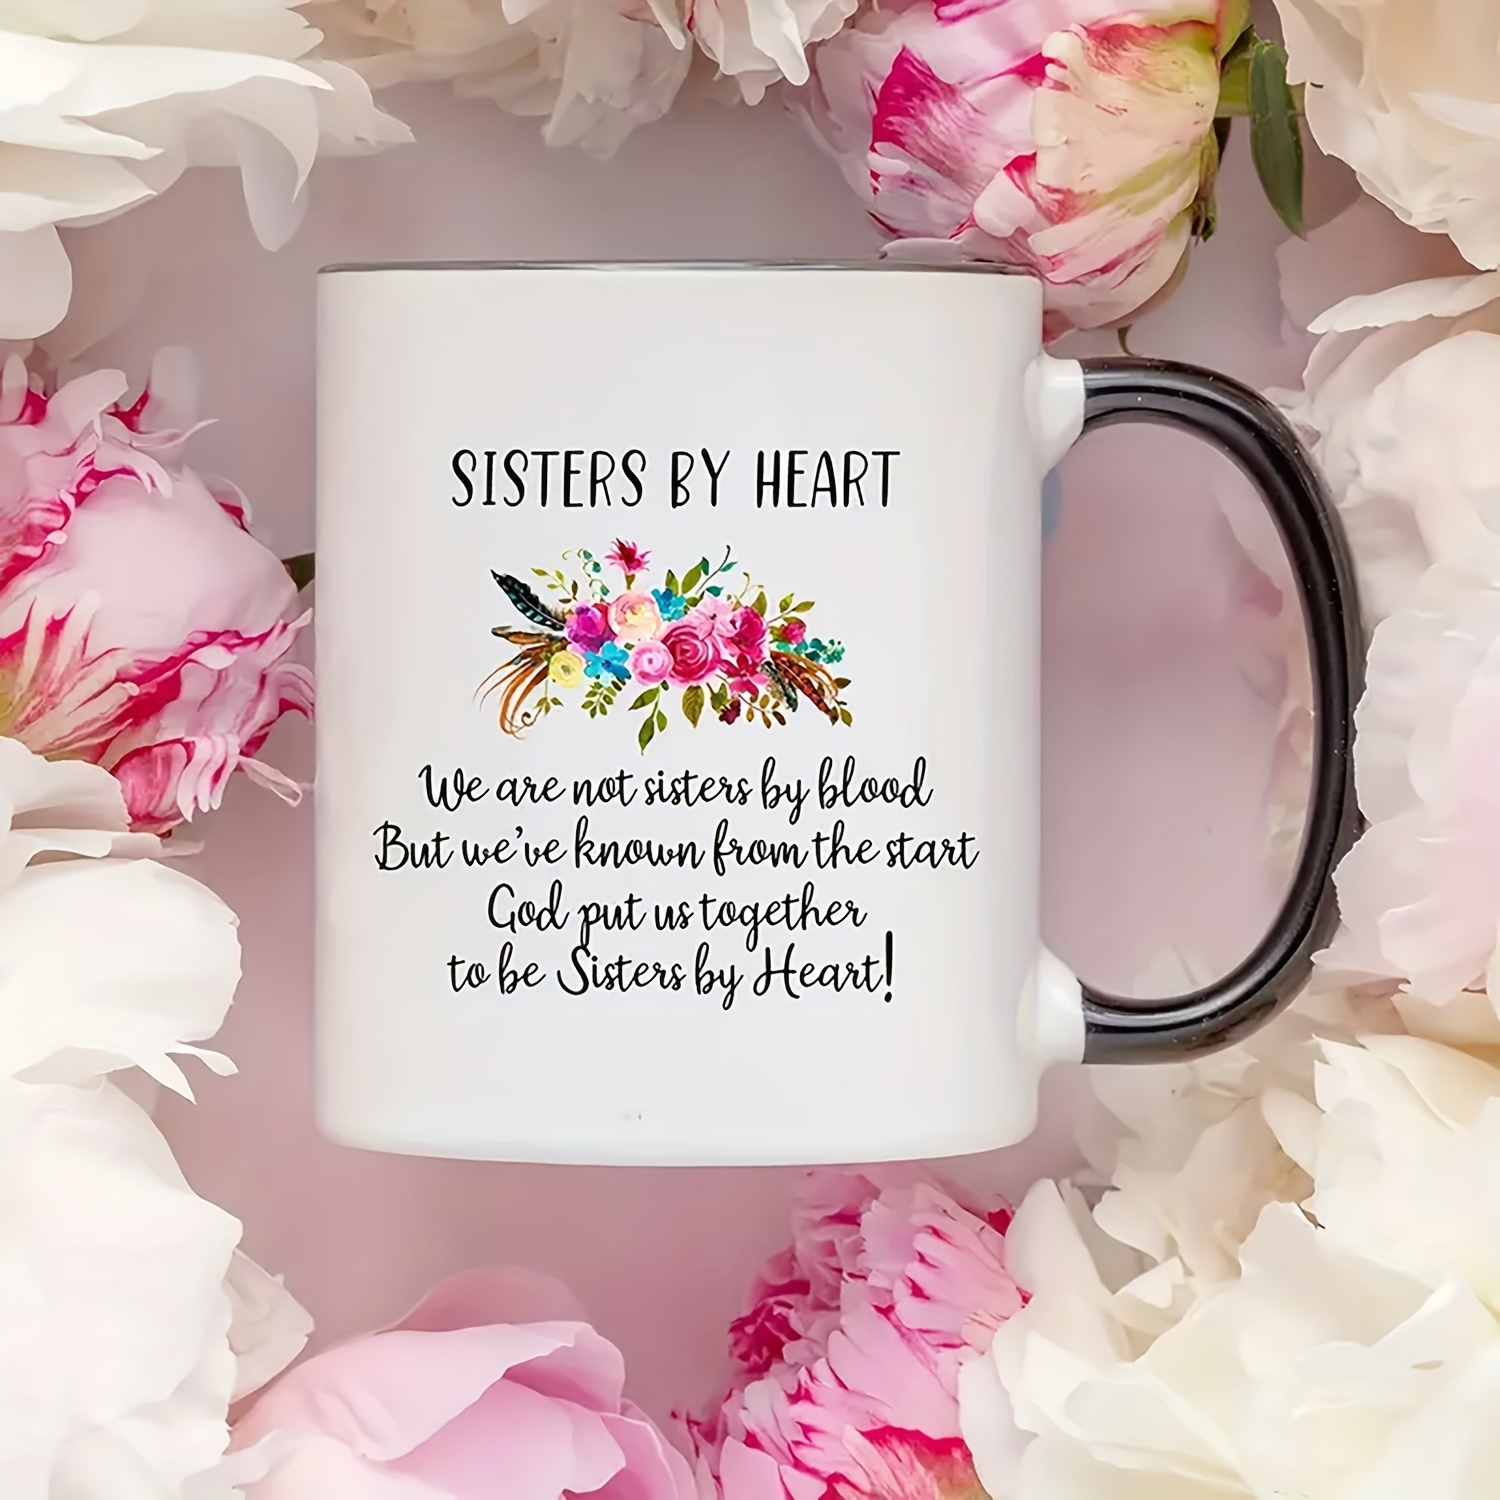 

1pc, Ceramic Coffee Mug, 11oz Sisters By Heart Coffee Cup, Perfect For Summer And Winter Drinks, Home Kitchen Item, Birthday Gift